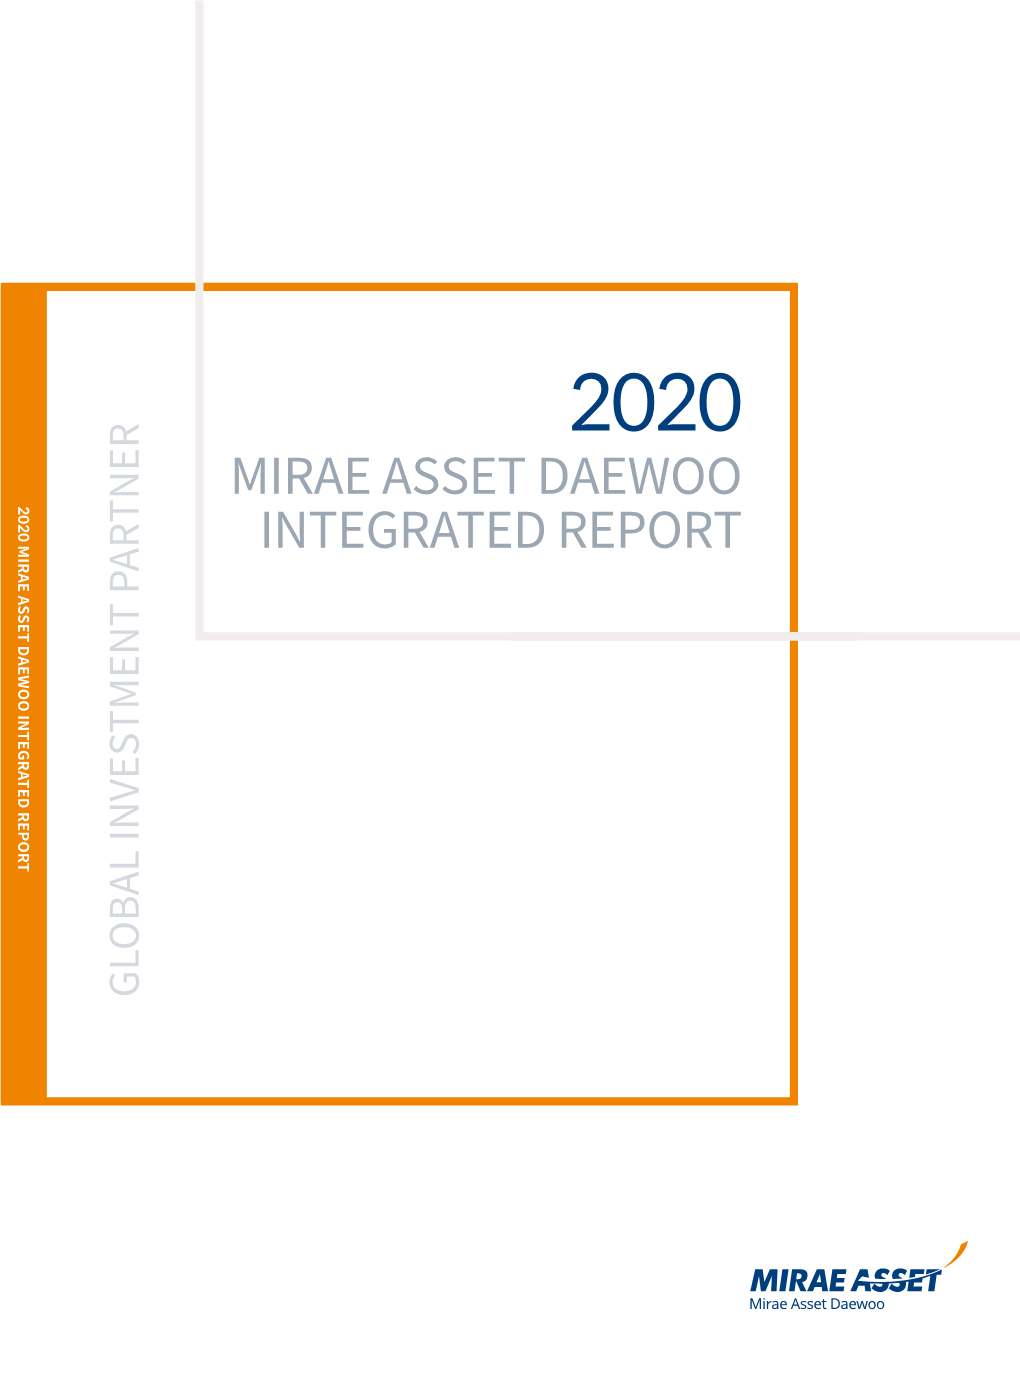 MIRAE ASSET DAEWOO INTEGRATED REPORT About This Report